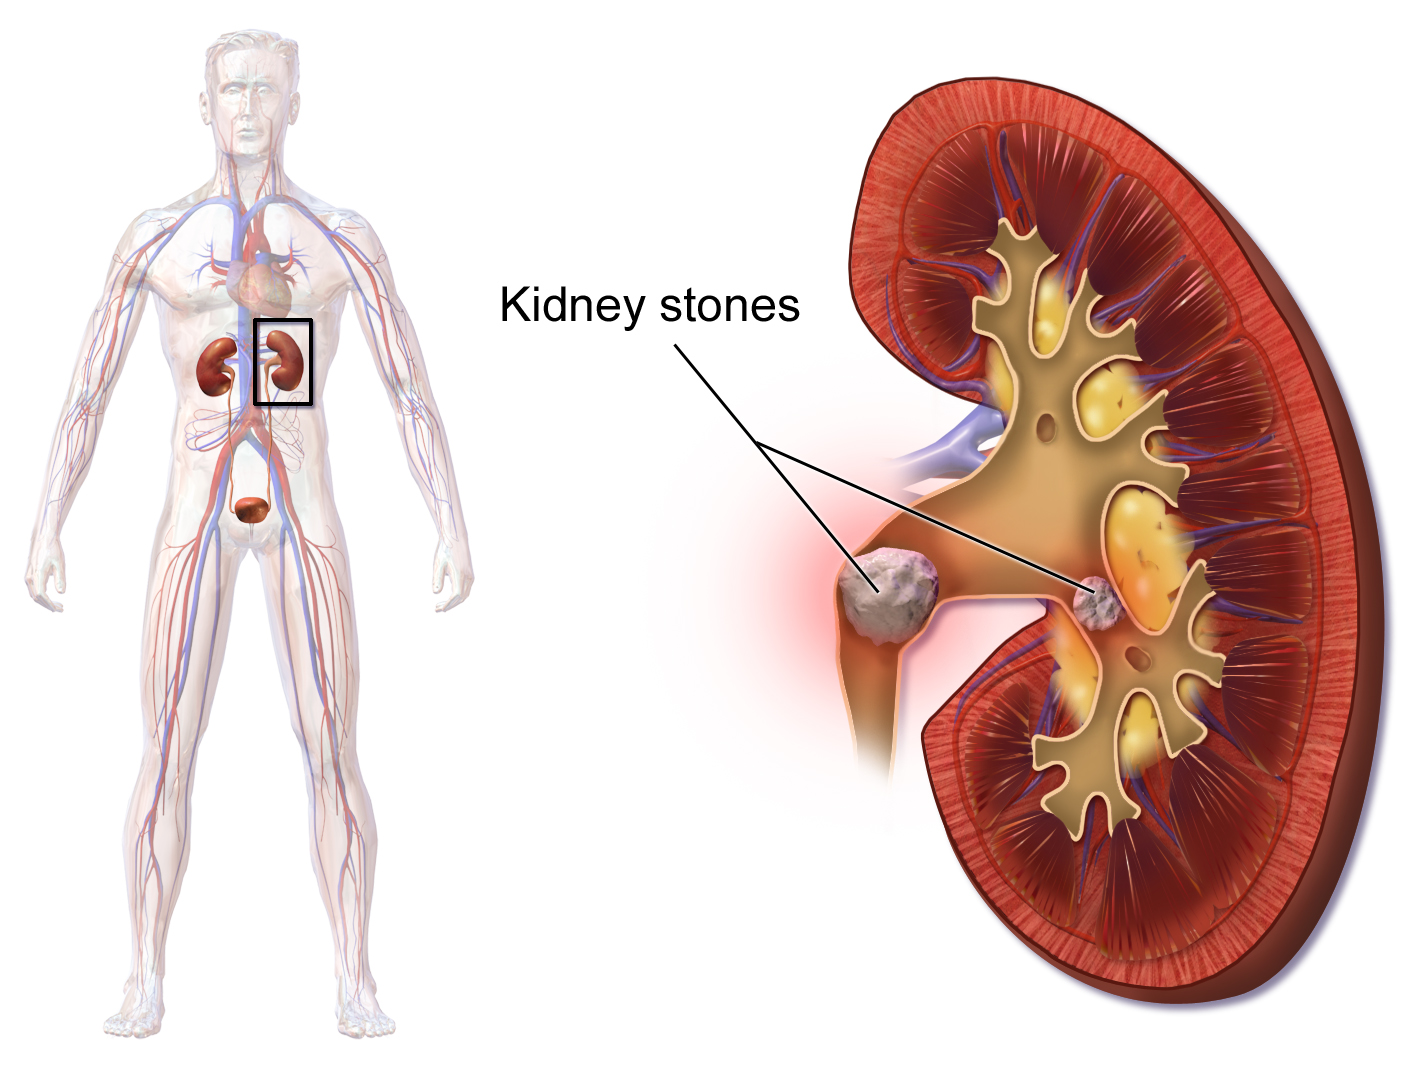 Kidney stones can be removed with Shatvari